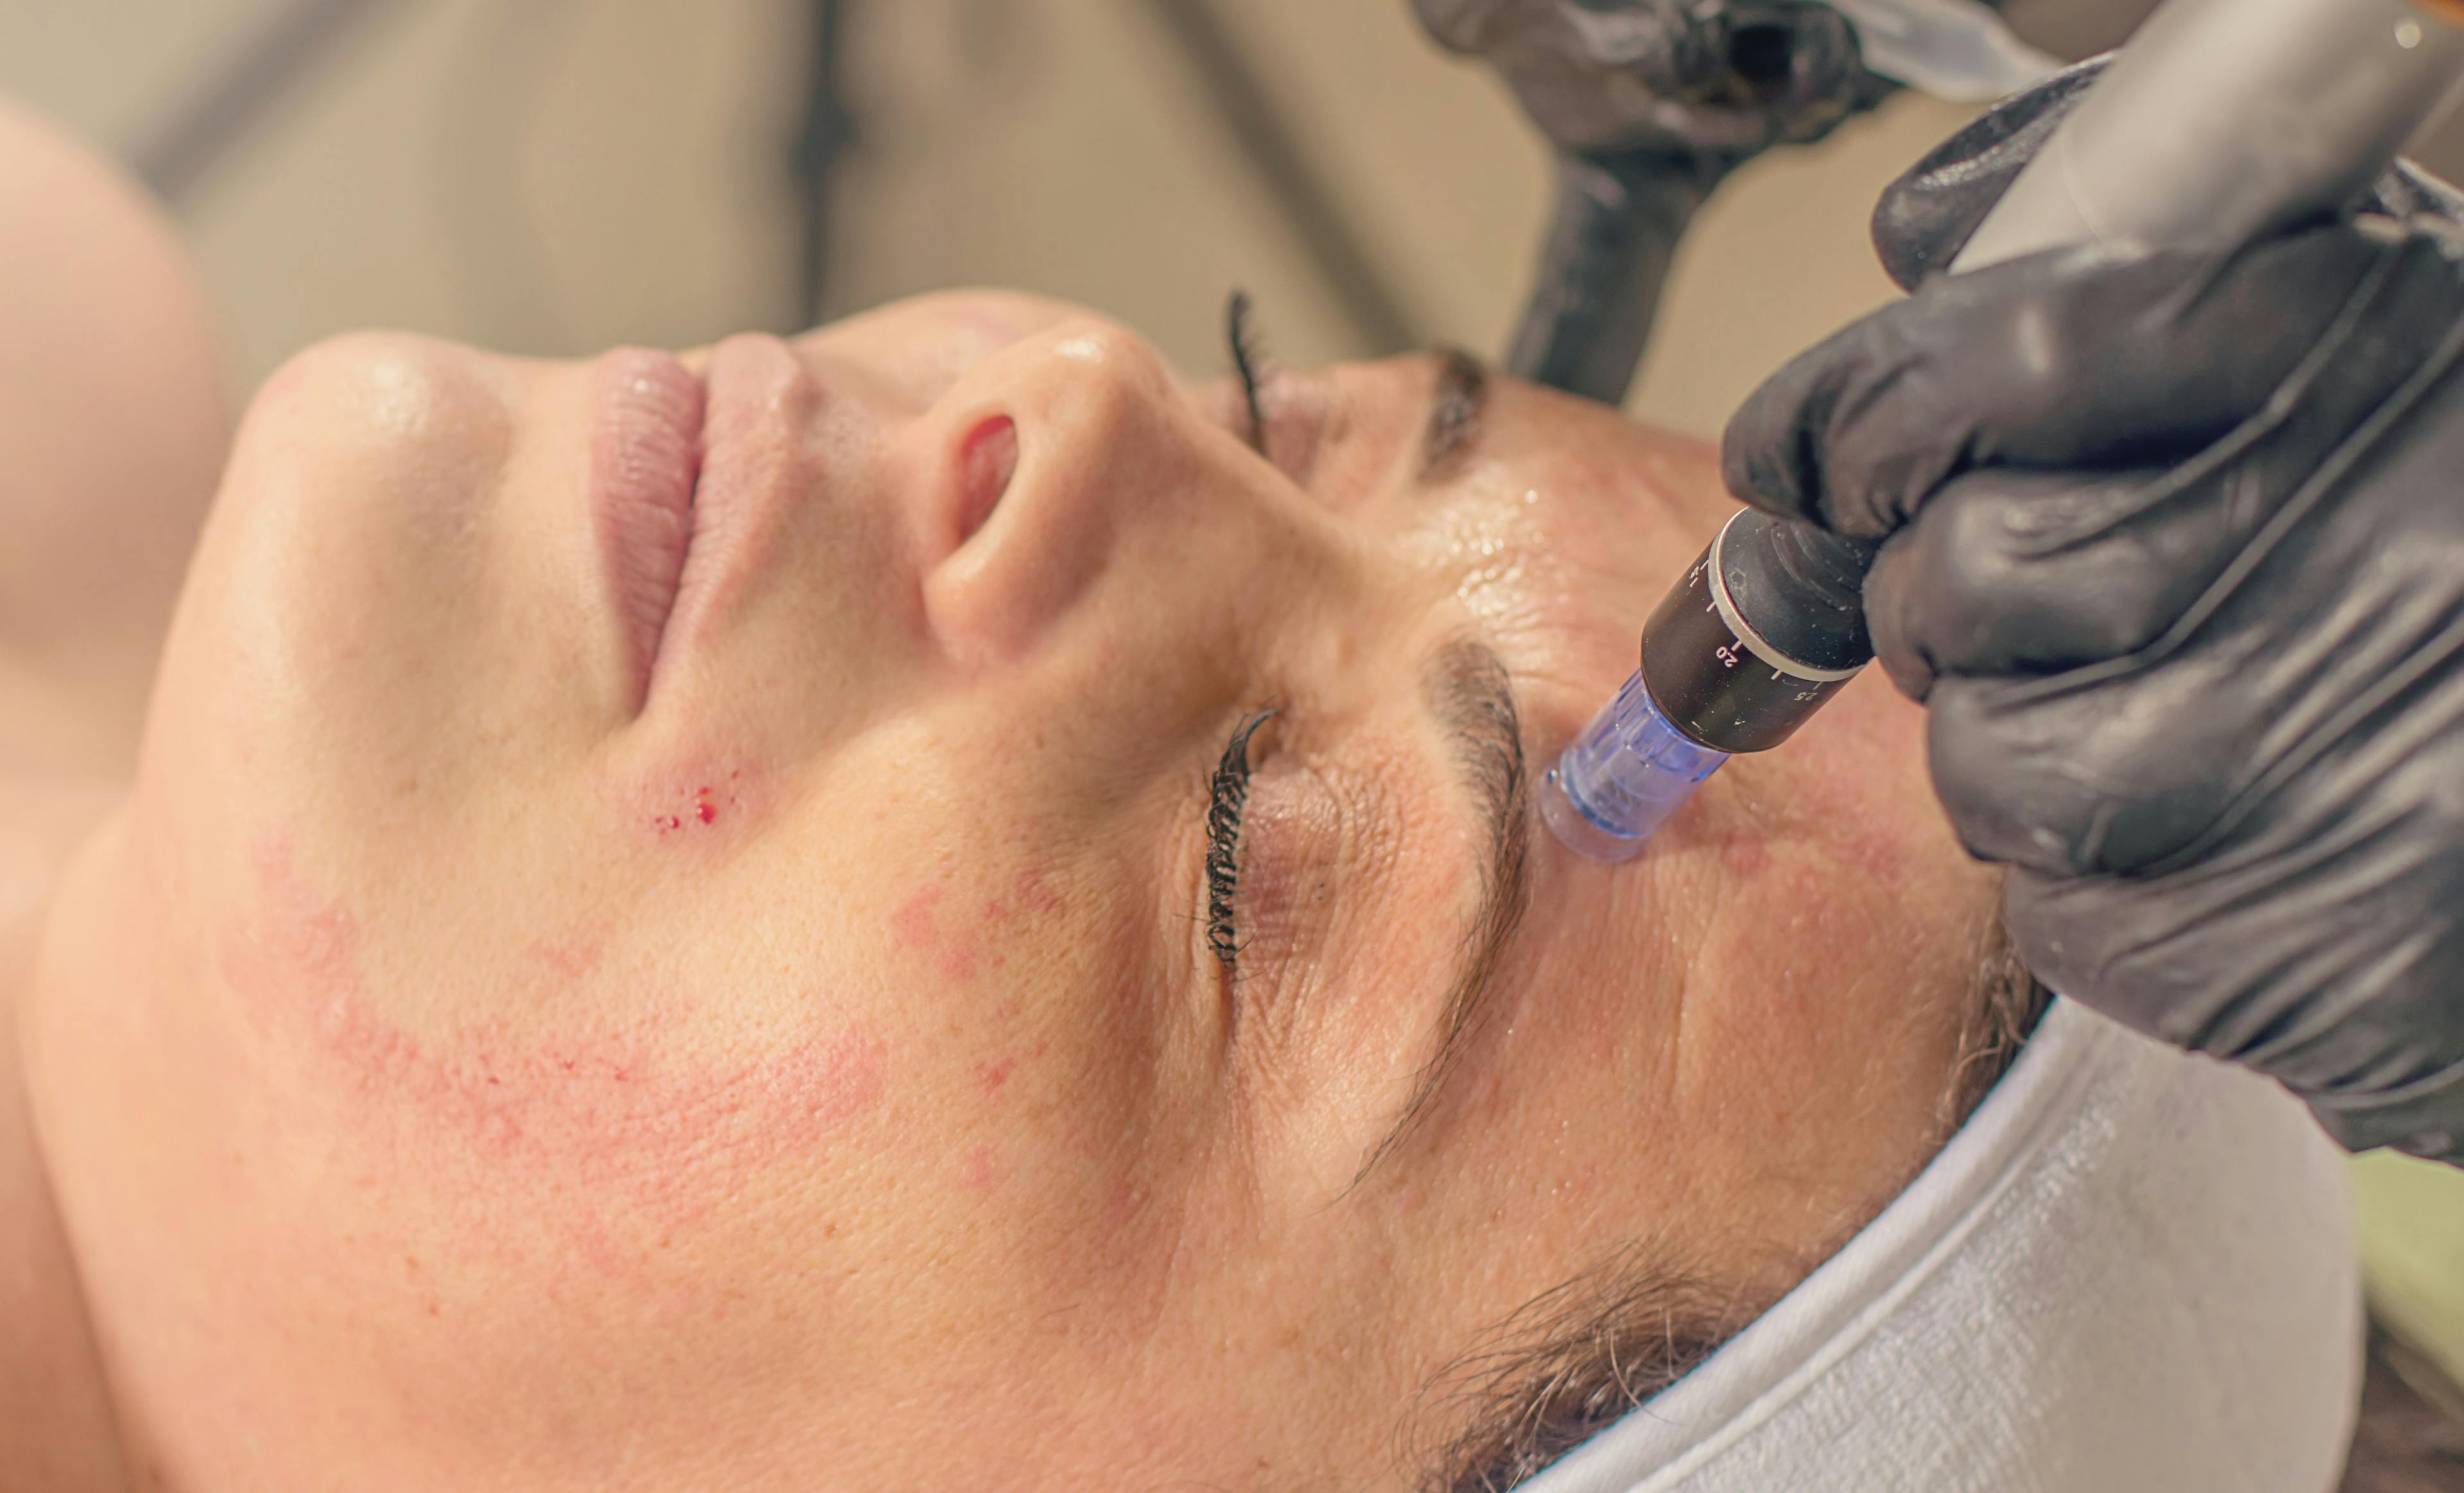 Microneedling improves acne scars, hyperpigmentation in skin of color